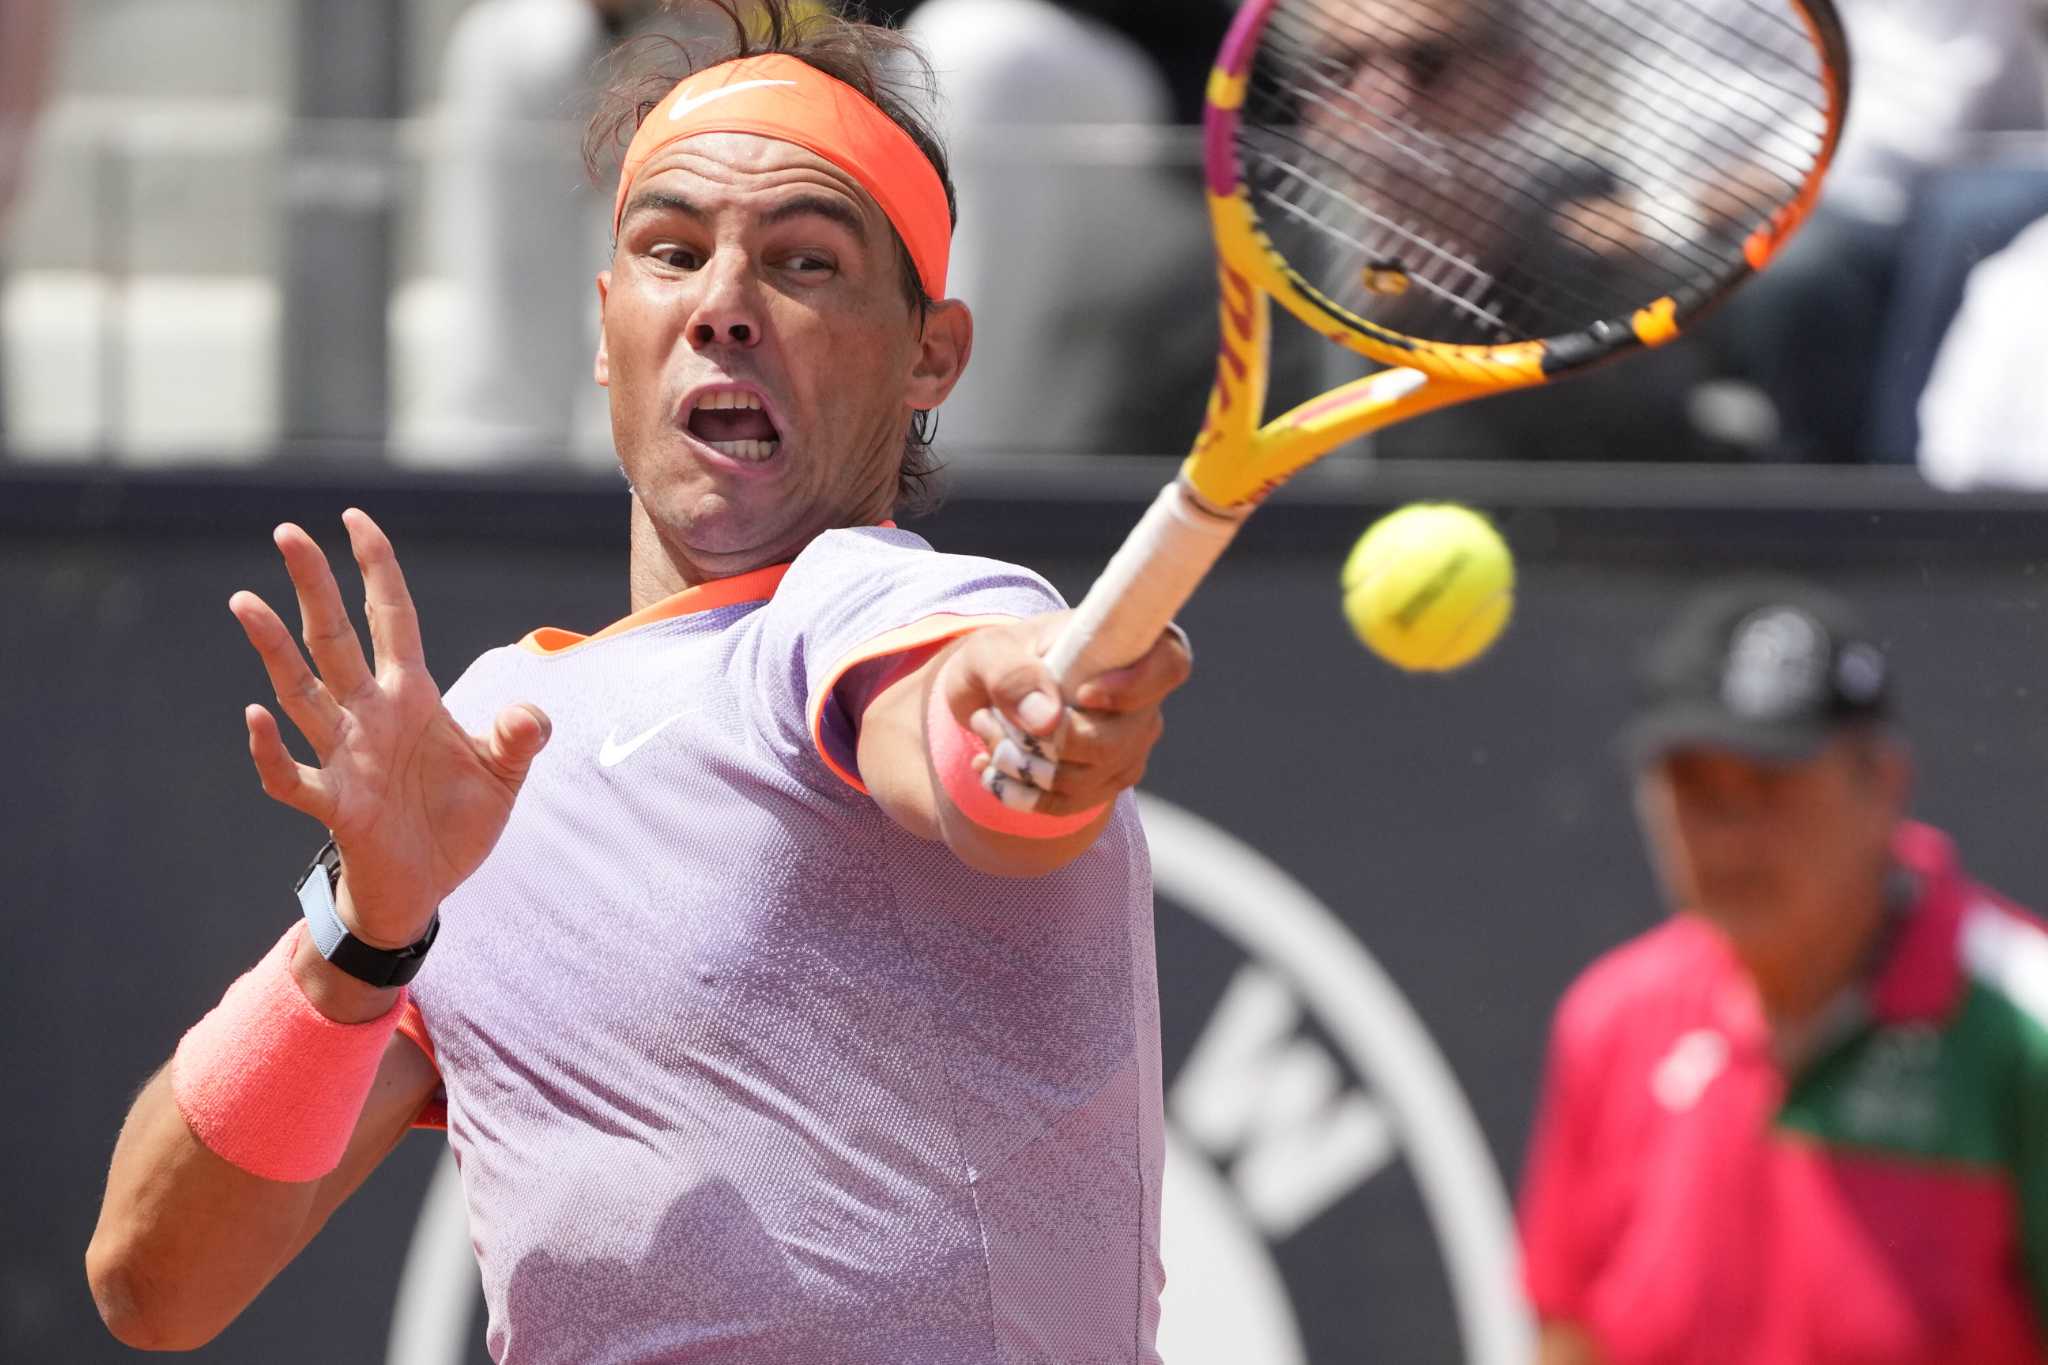 Rafael Nadal returns to Roland Garros to practice amid doubts over his fitness and form